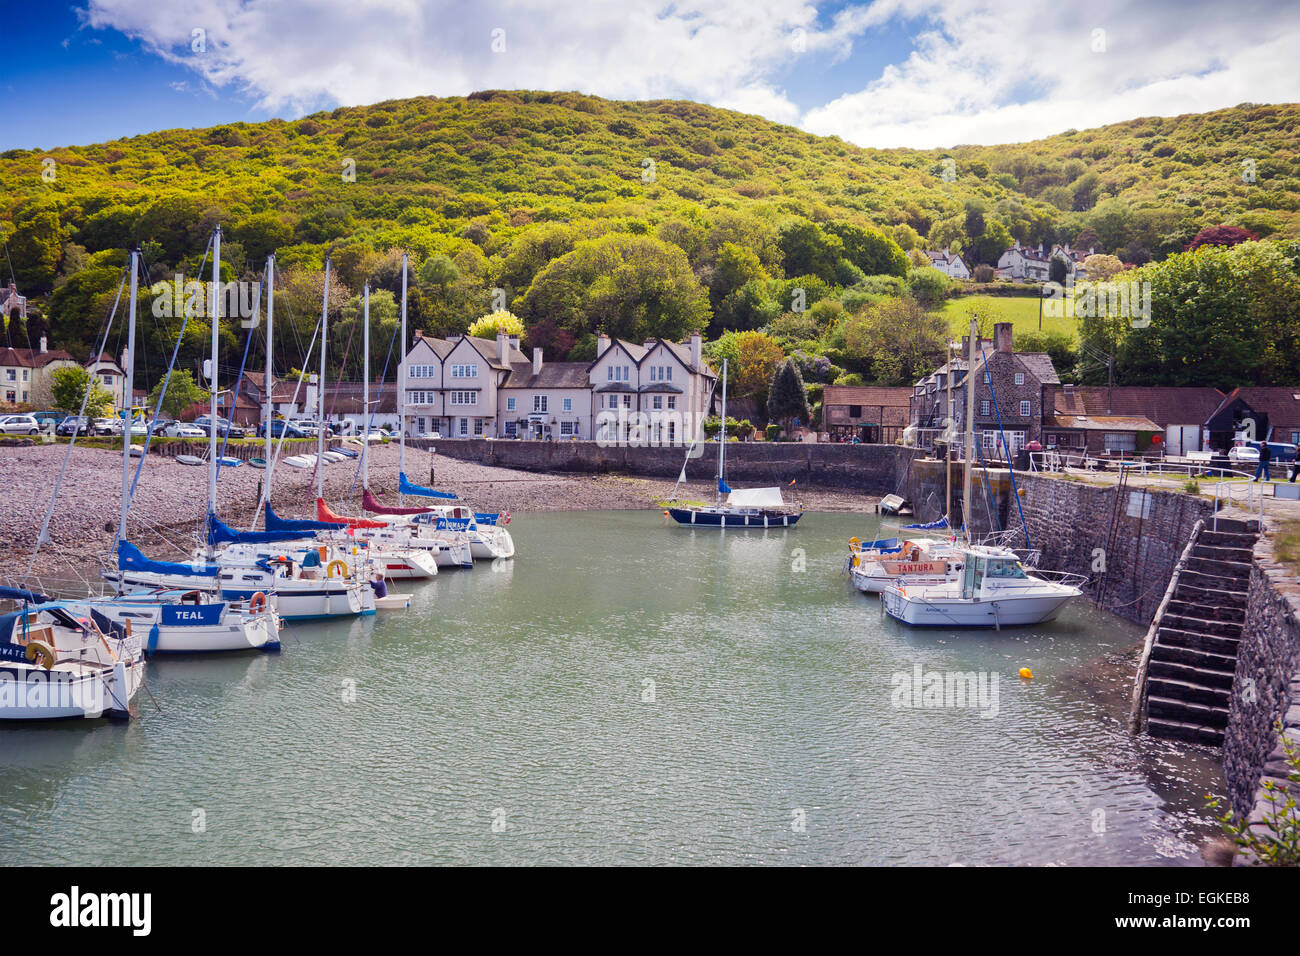 Leisure yachts moored at Porlock Weir on the Bristol Channel in Somerset, England, UK Stock Photo